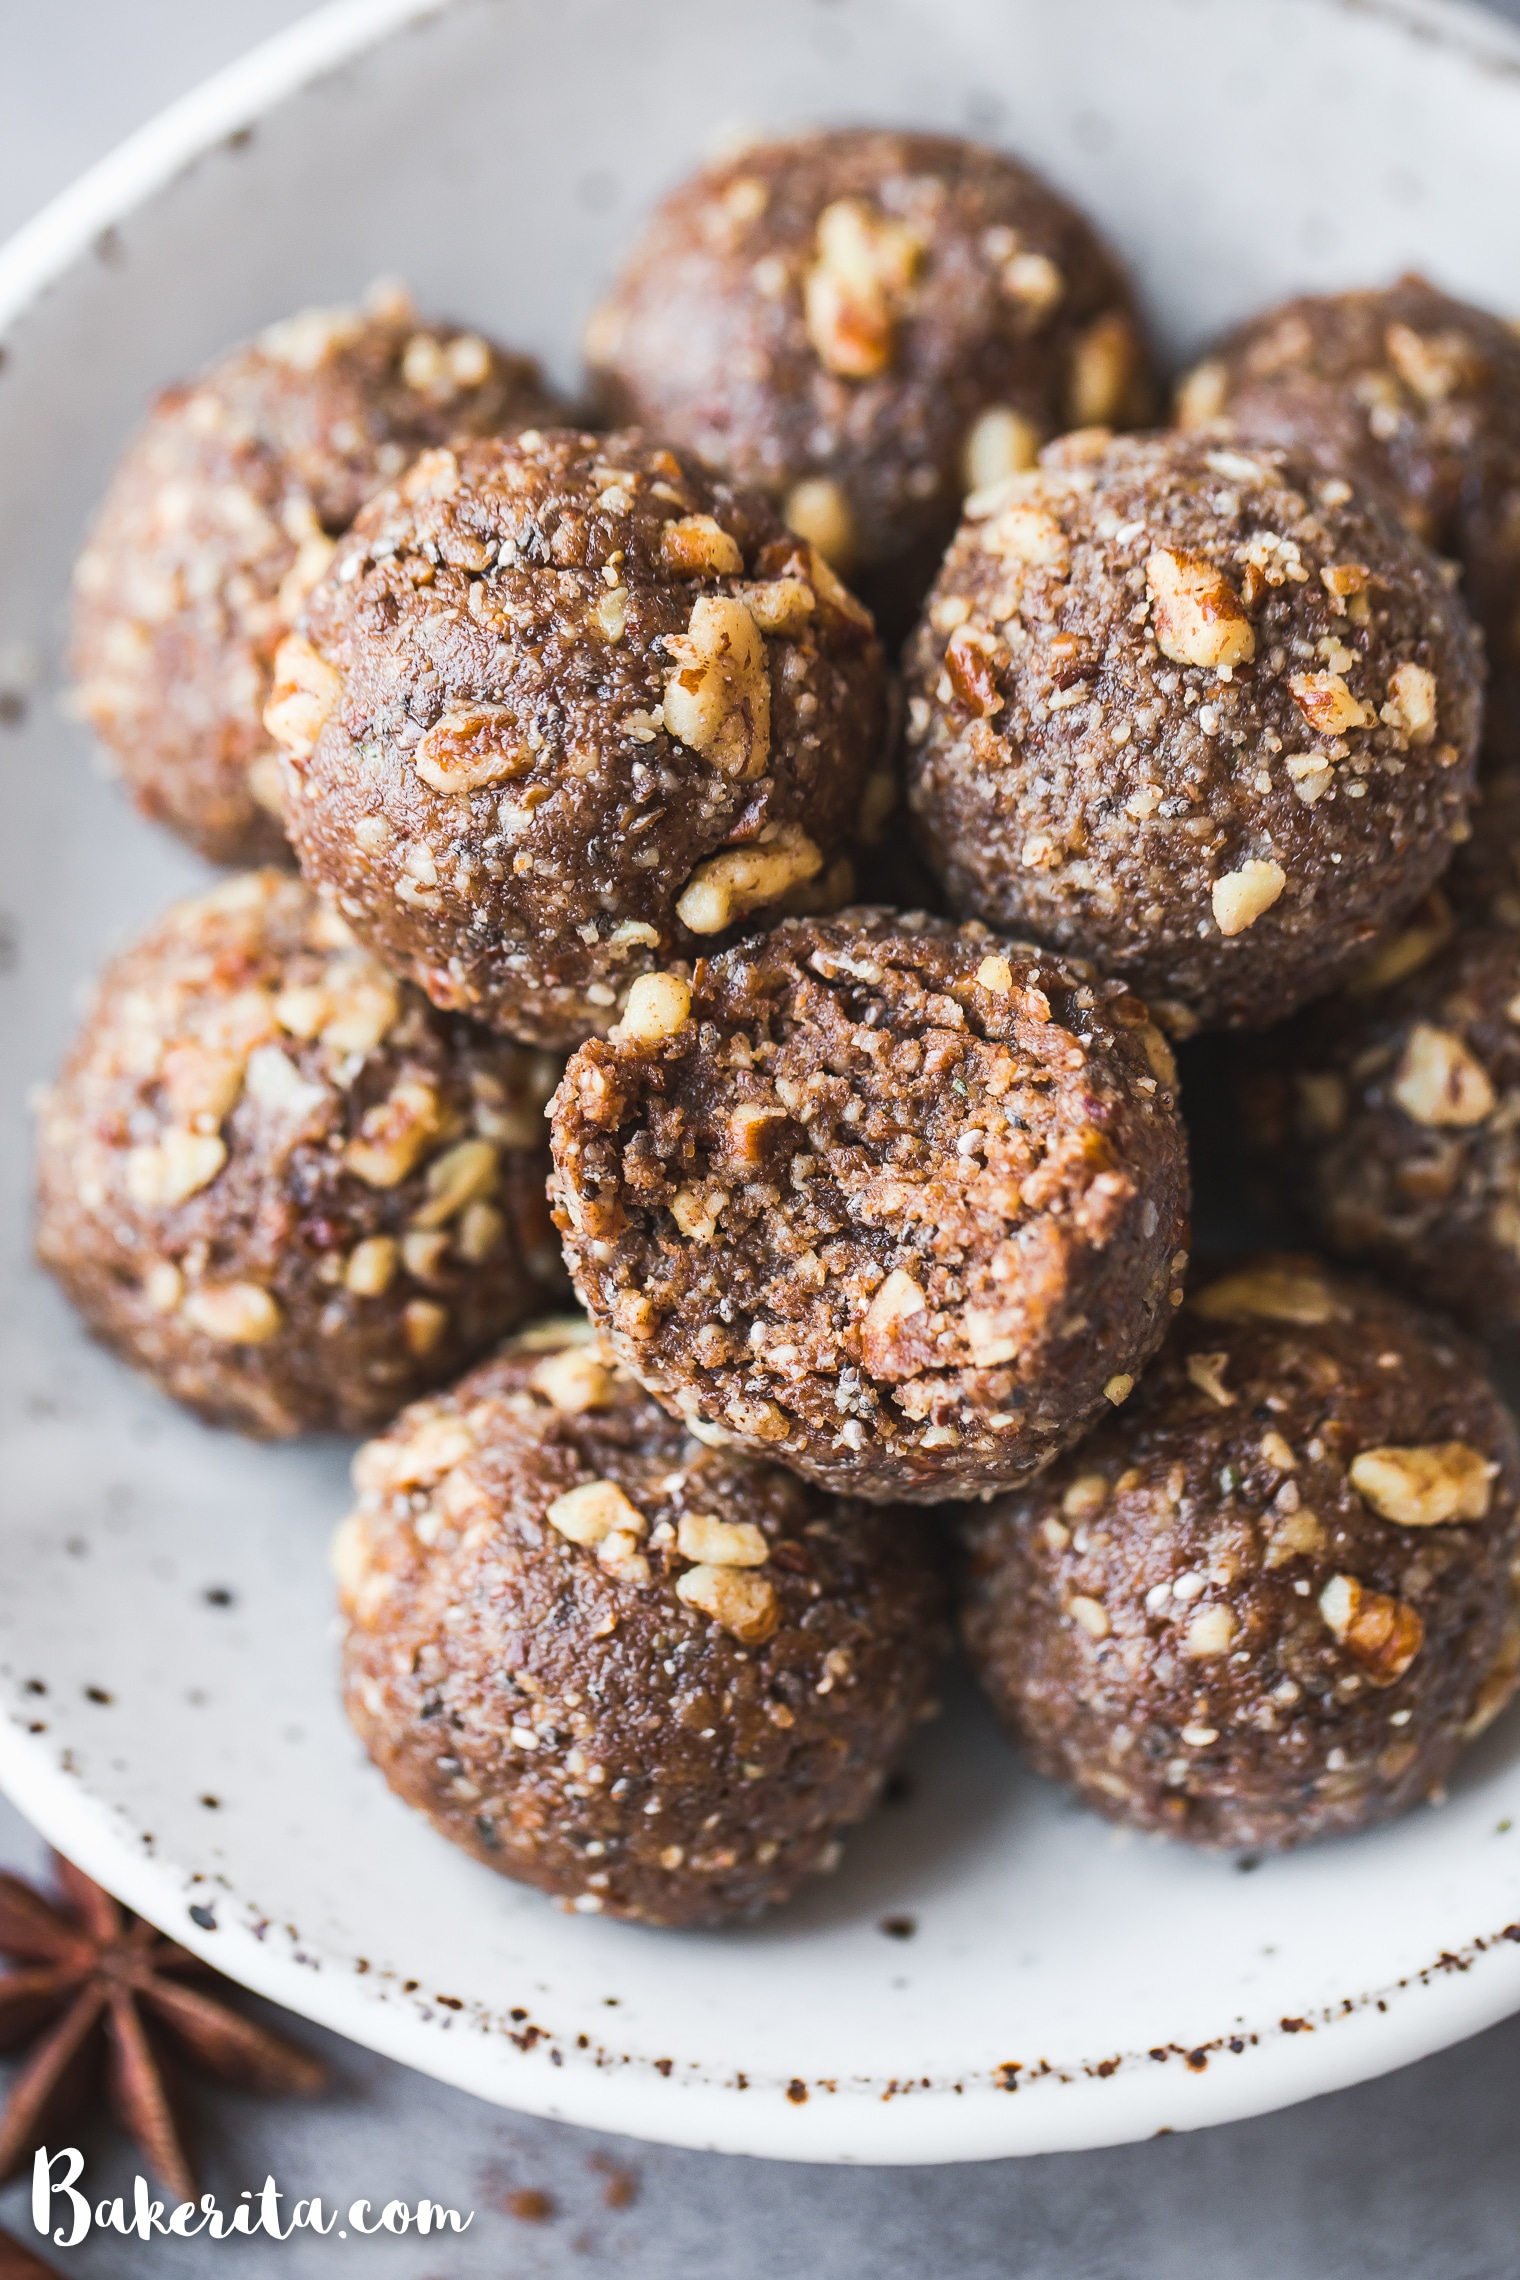 These Pumpkin Spice Energy Bites are full of healthy fats, protein, and of course, delicious pumpkin spice flavor! These Vegan, Paleo, Keto, and Whole30-friendly energy balls will keep you going when hunger hits.